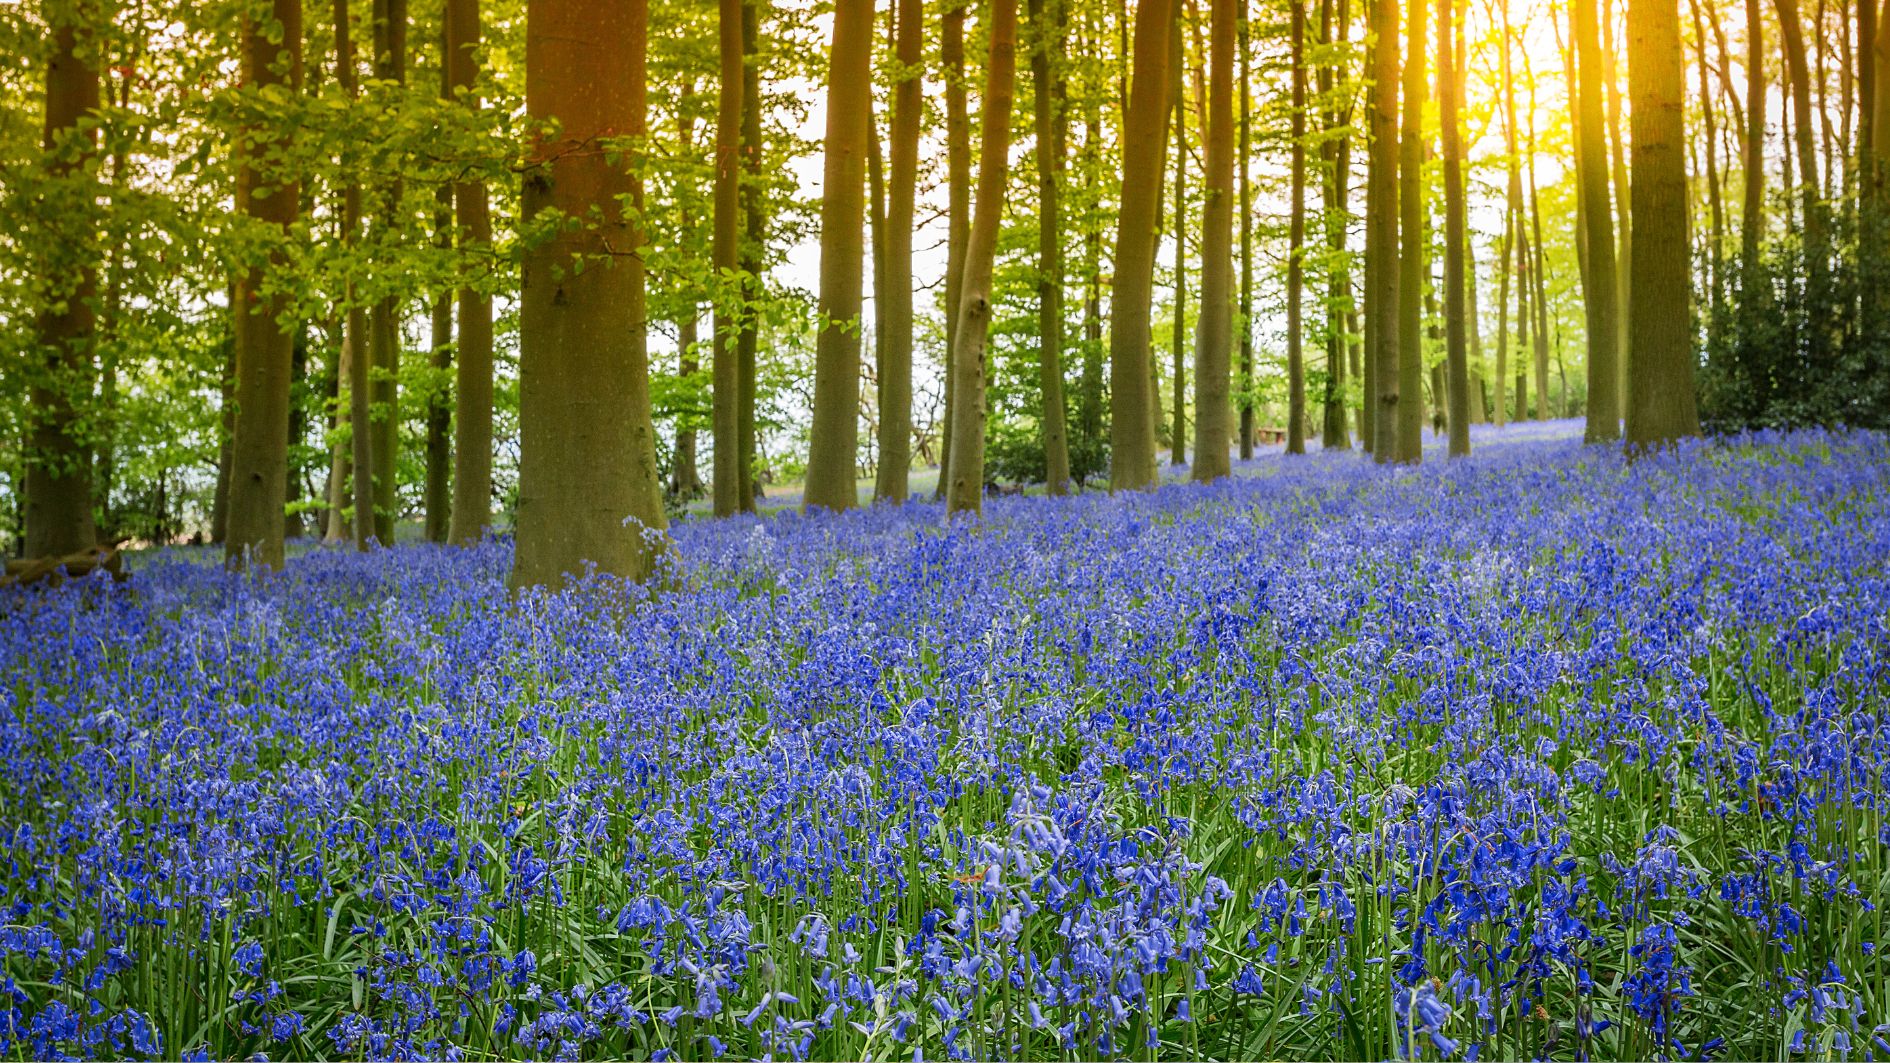 A photograph showing a woodland carpeted with bluebells, a site loved by Michael Anthony Stone.